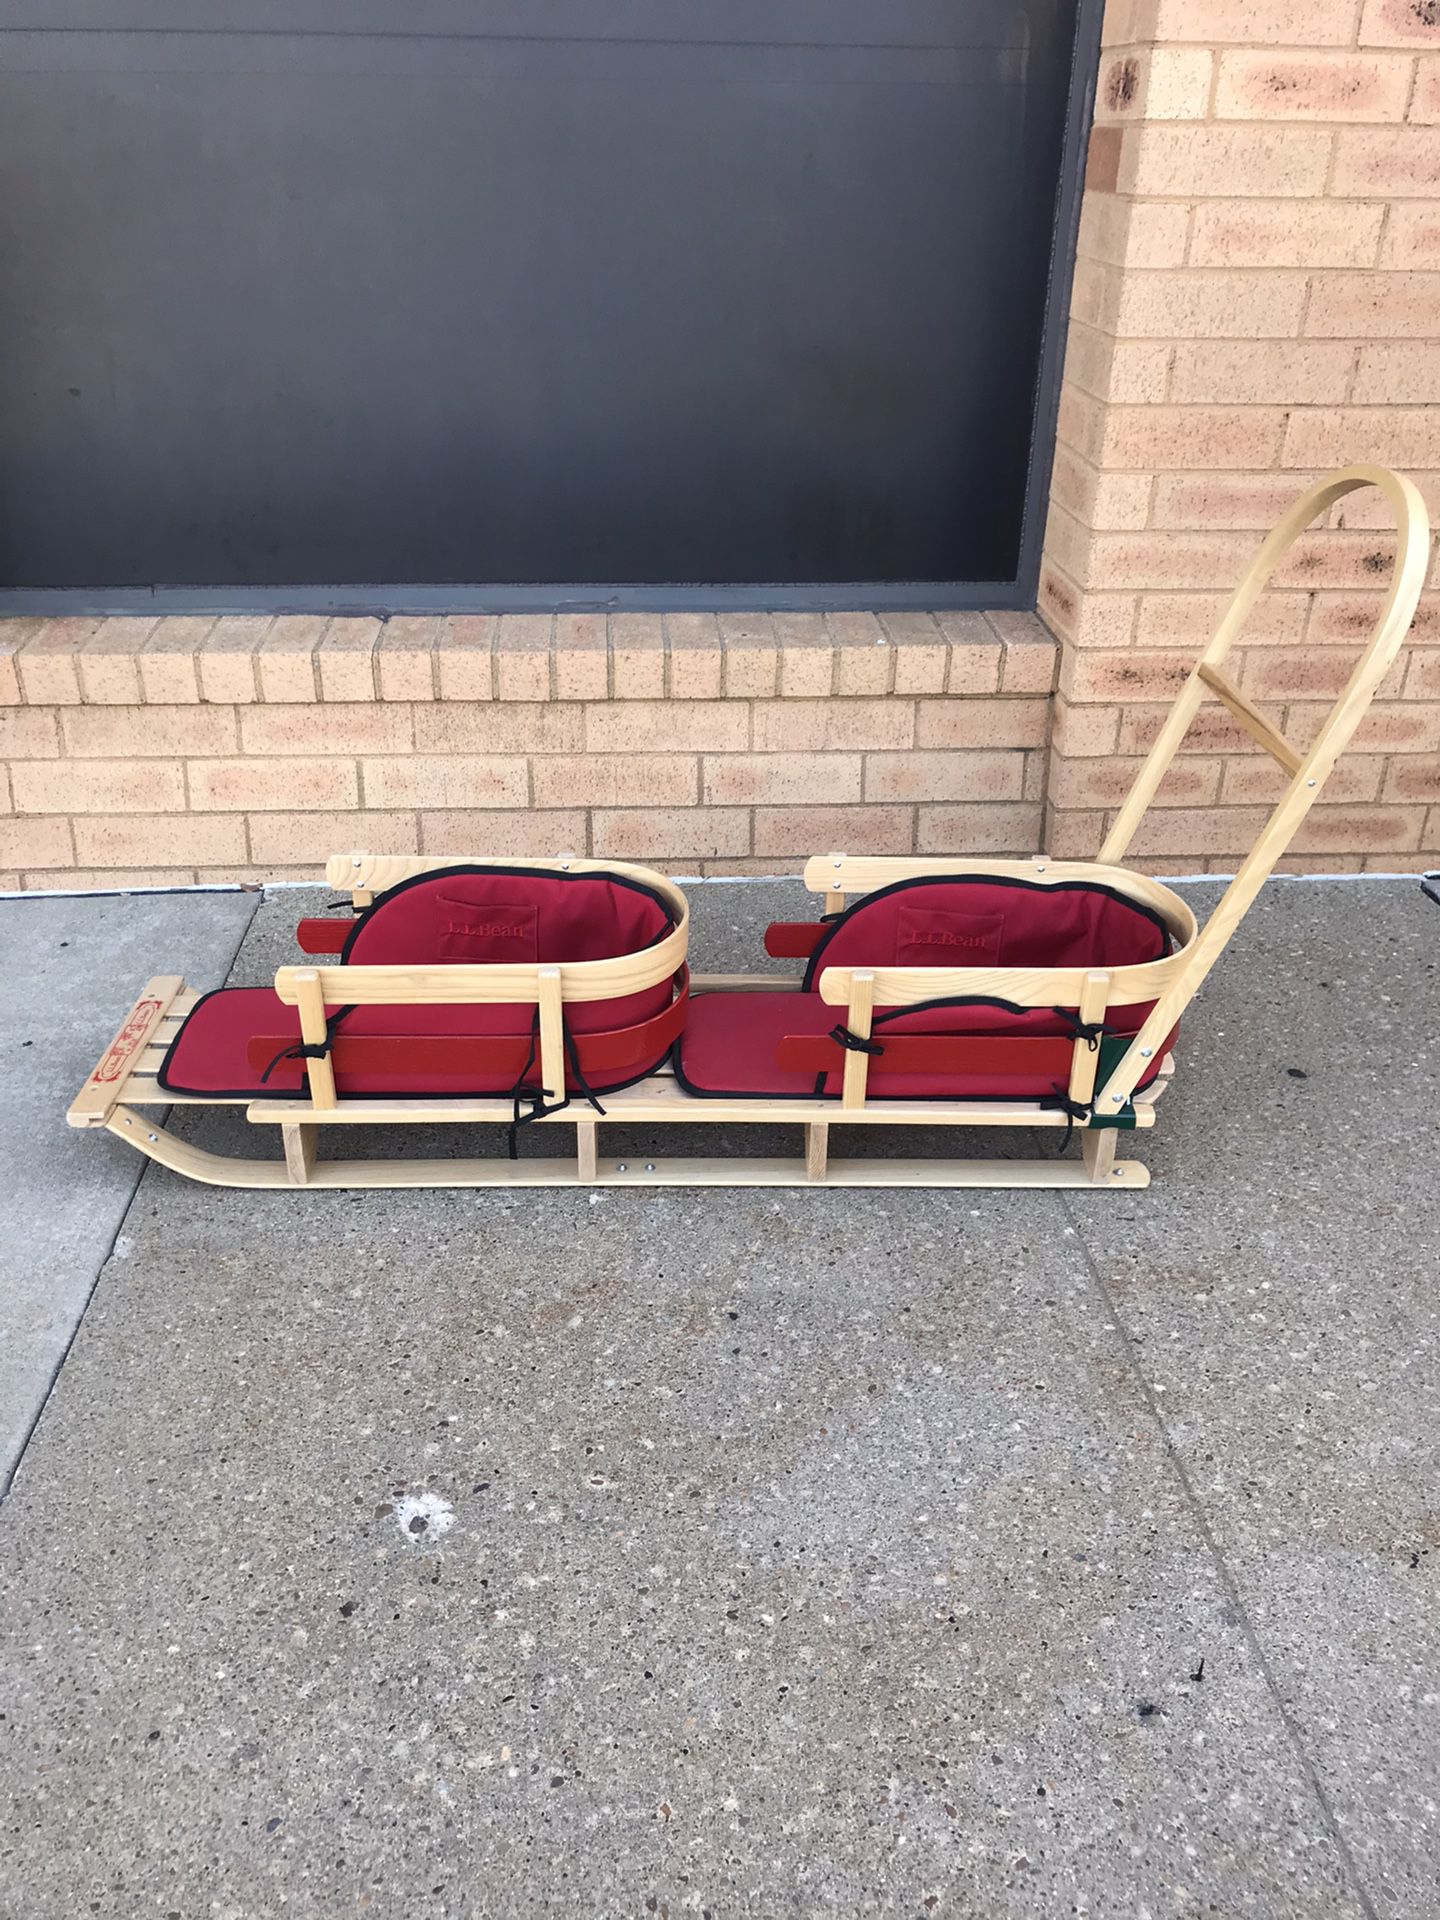 Large LL Bean Kid's tandem Wooden Pull Sled With Red Cushion Excellent Condition.